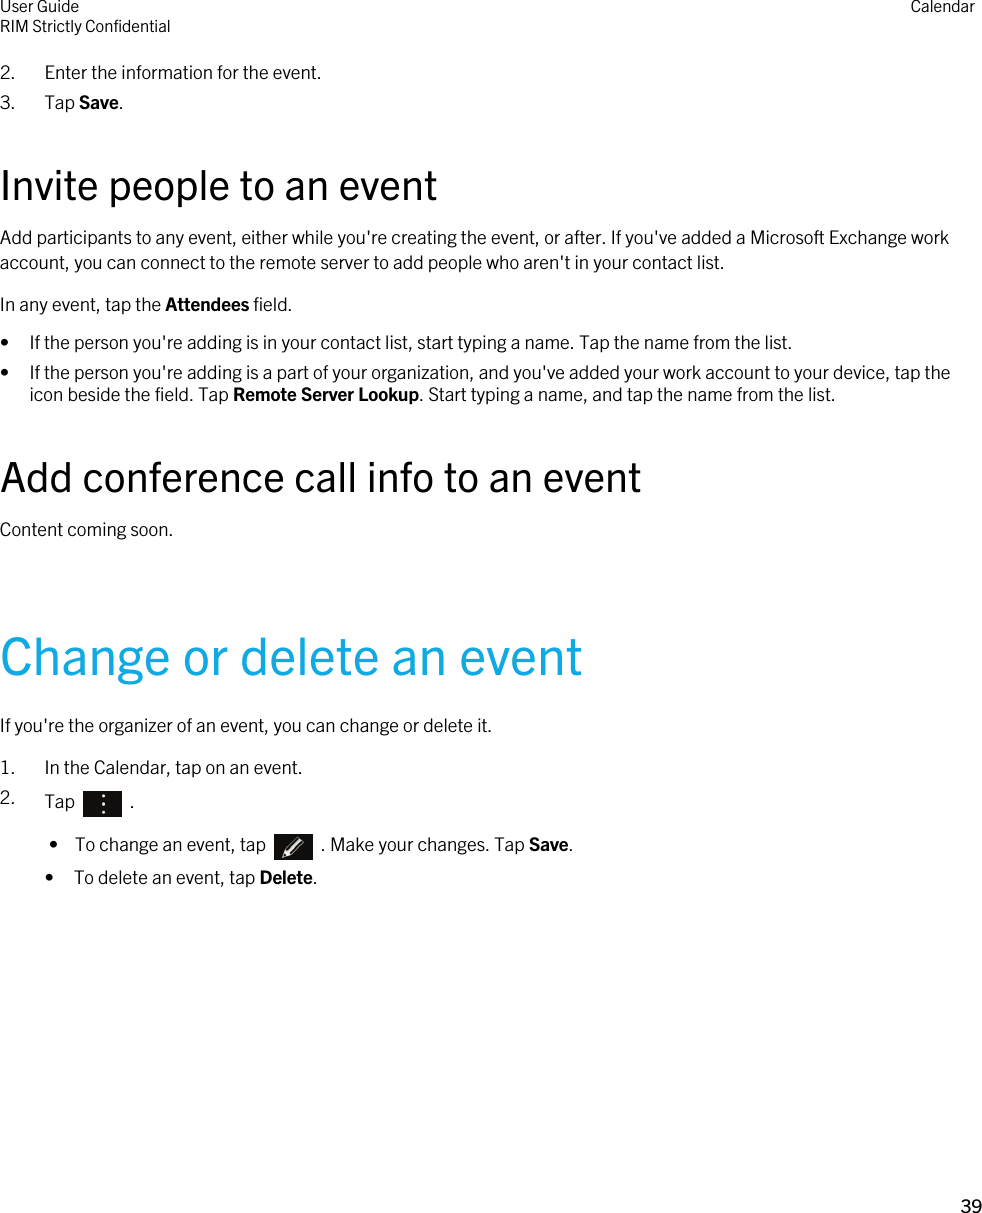 2. Enter the information for the event.3. Tap Save.Invite people to an eventAdd participants to any event, either while you&apos;re creating the event, or after. If you&apos;ve added a Microsoft Exchange work account, you can connect to the remote server to add people who aren&apos;t in your contact list.In any event, tap the Attendees field.• If the person you&apos;re adding is in your contact list, start typing a name. Tap the name from the list.• If the person you&apos;re adding is a part of your organization, and you&apos;ve added your work account to your device, tap the icon beside the field. Tap Remote Server Lookup. Start typing a name, and tap the name from the list.Add conference call info to an eventContent coming soon.Change or delete an eventIf you&apos;re the organizer of an event, you can change or delete it.1. In the Calendar, tap on an event.2. Tap    . •  To change an event, tap    . Make your changes. Tap Save.• To delete an event, tap Delete.User GuideRIM Strictly Confidential Calendar39 